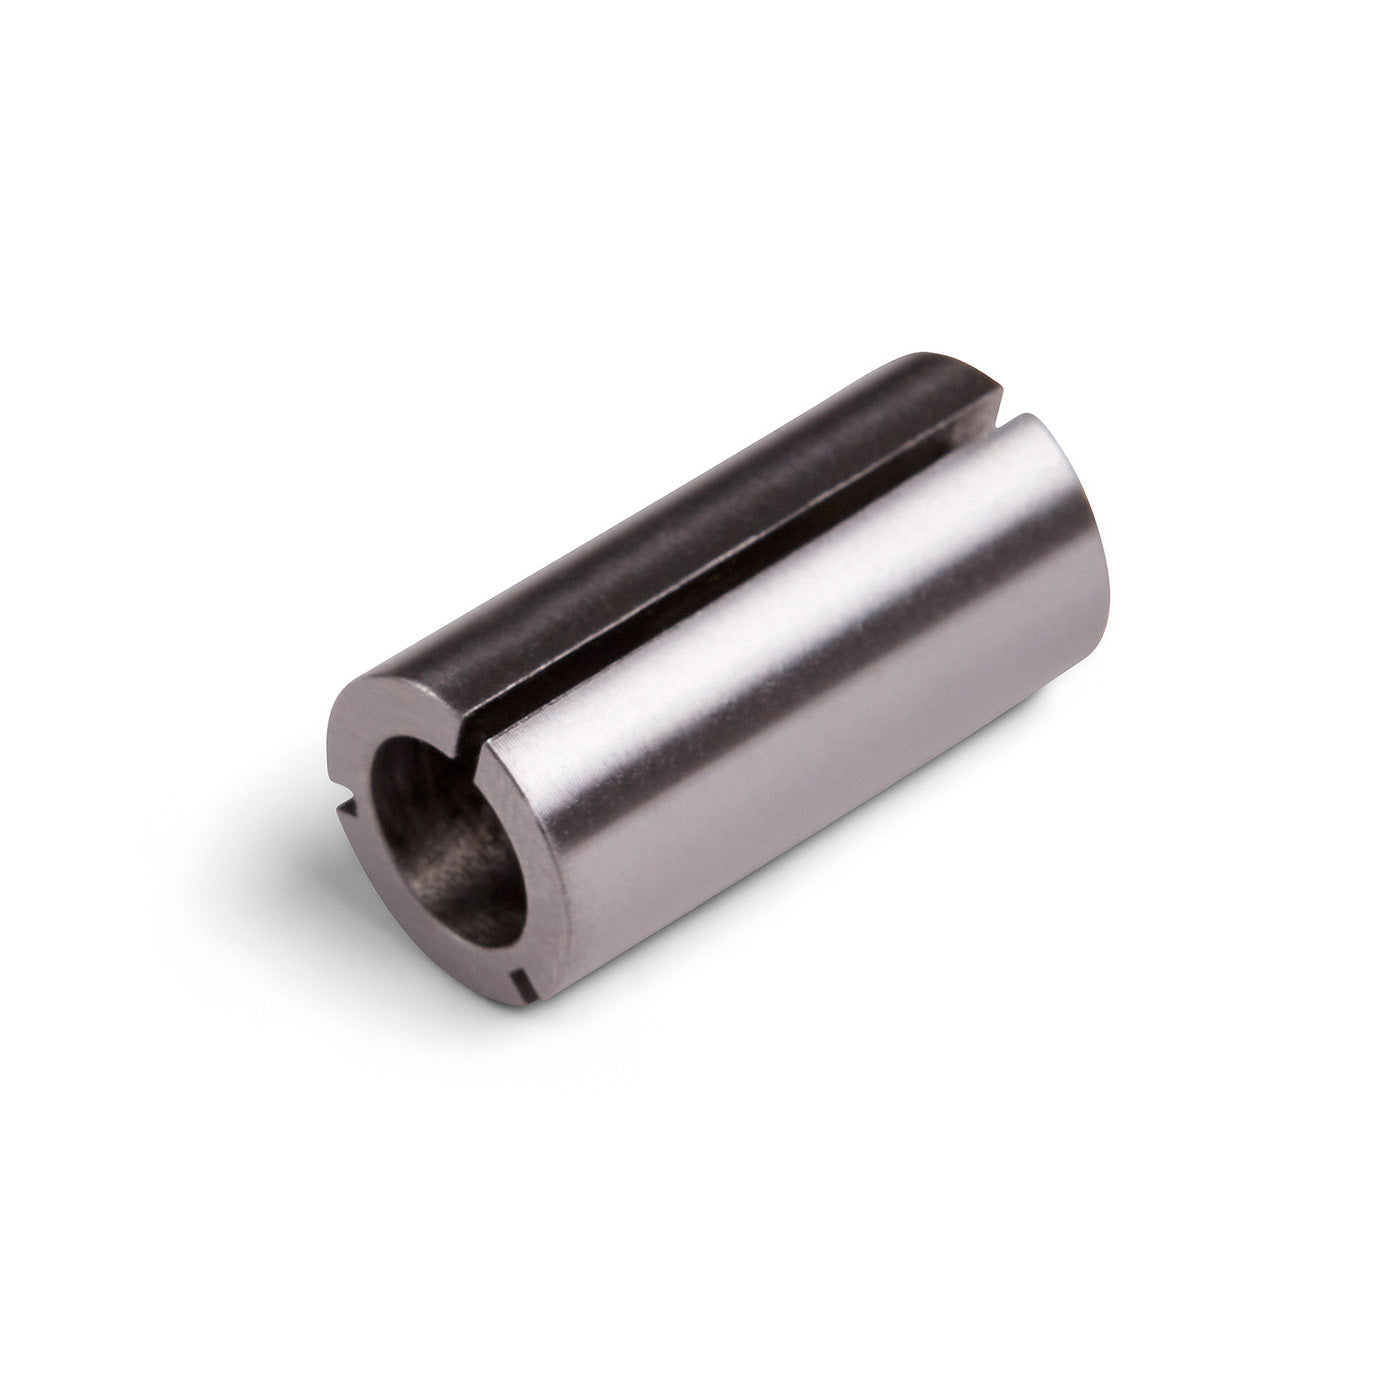 Collet Reduction Sleeve 1/2" to 8mm